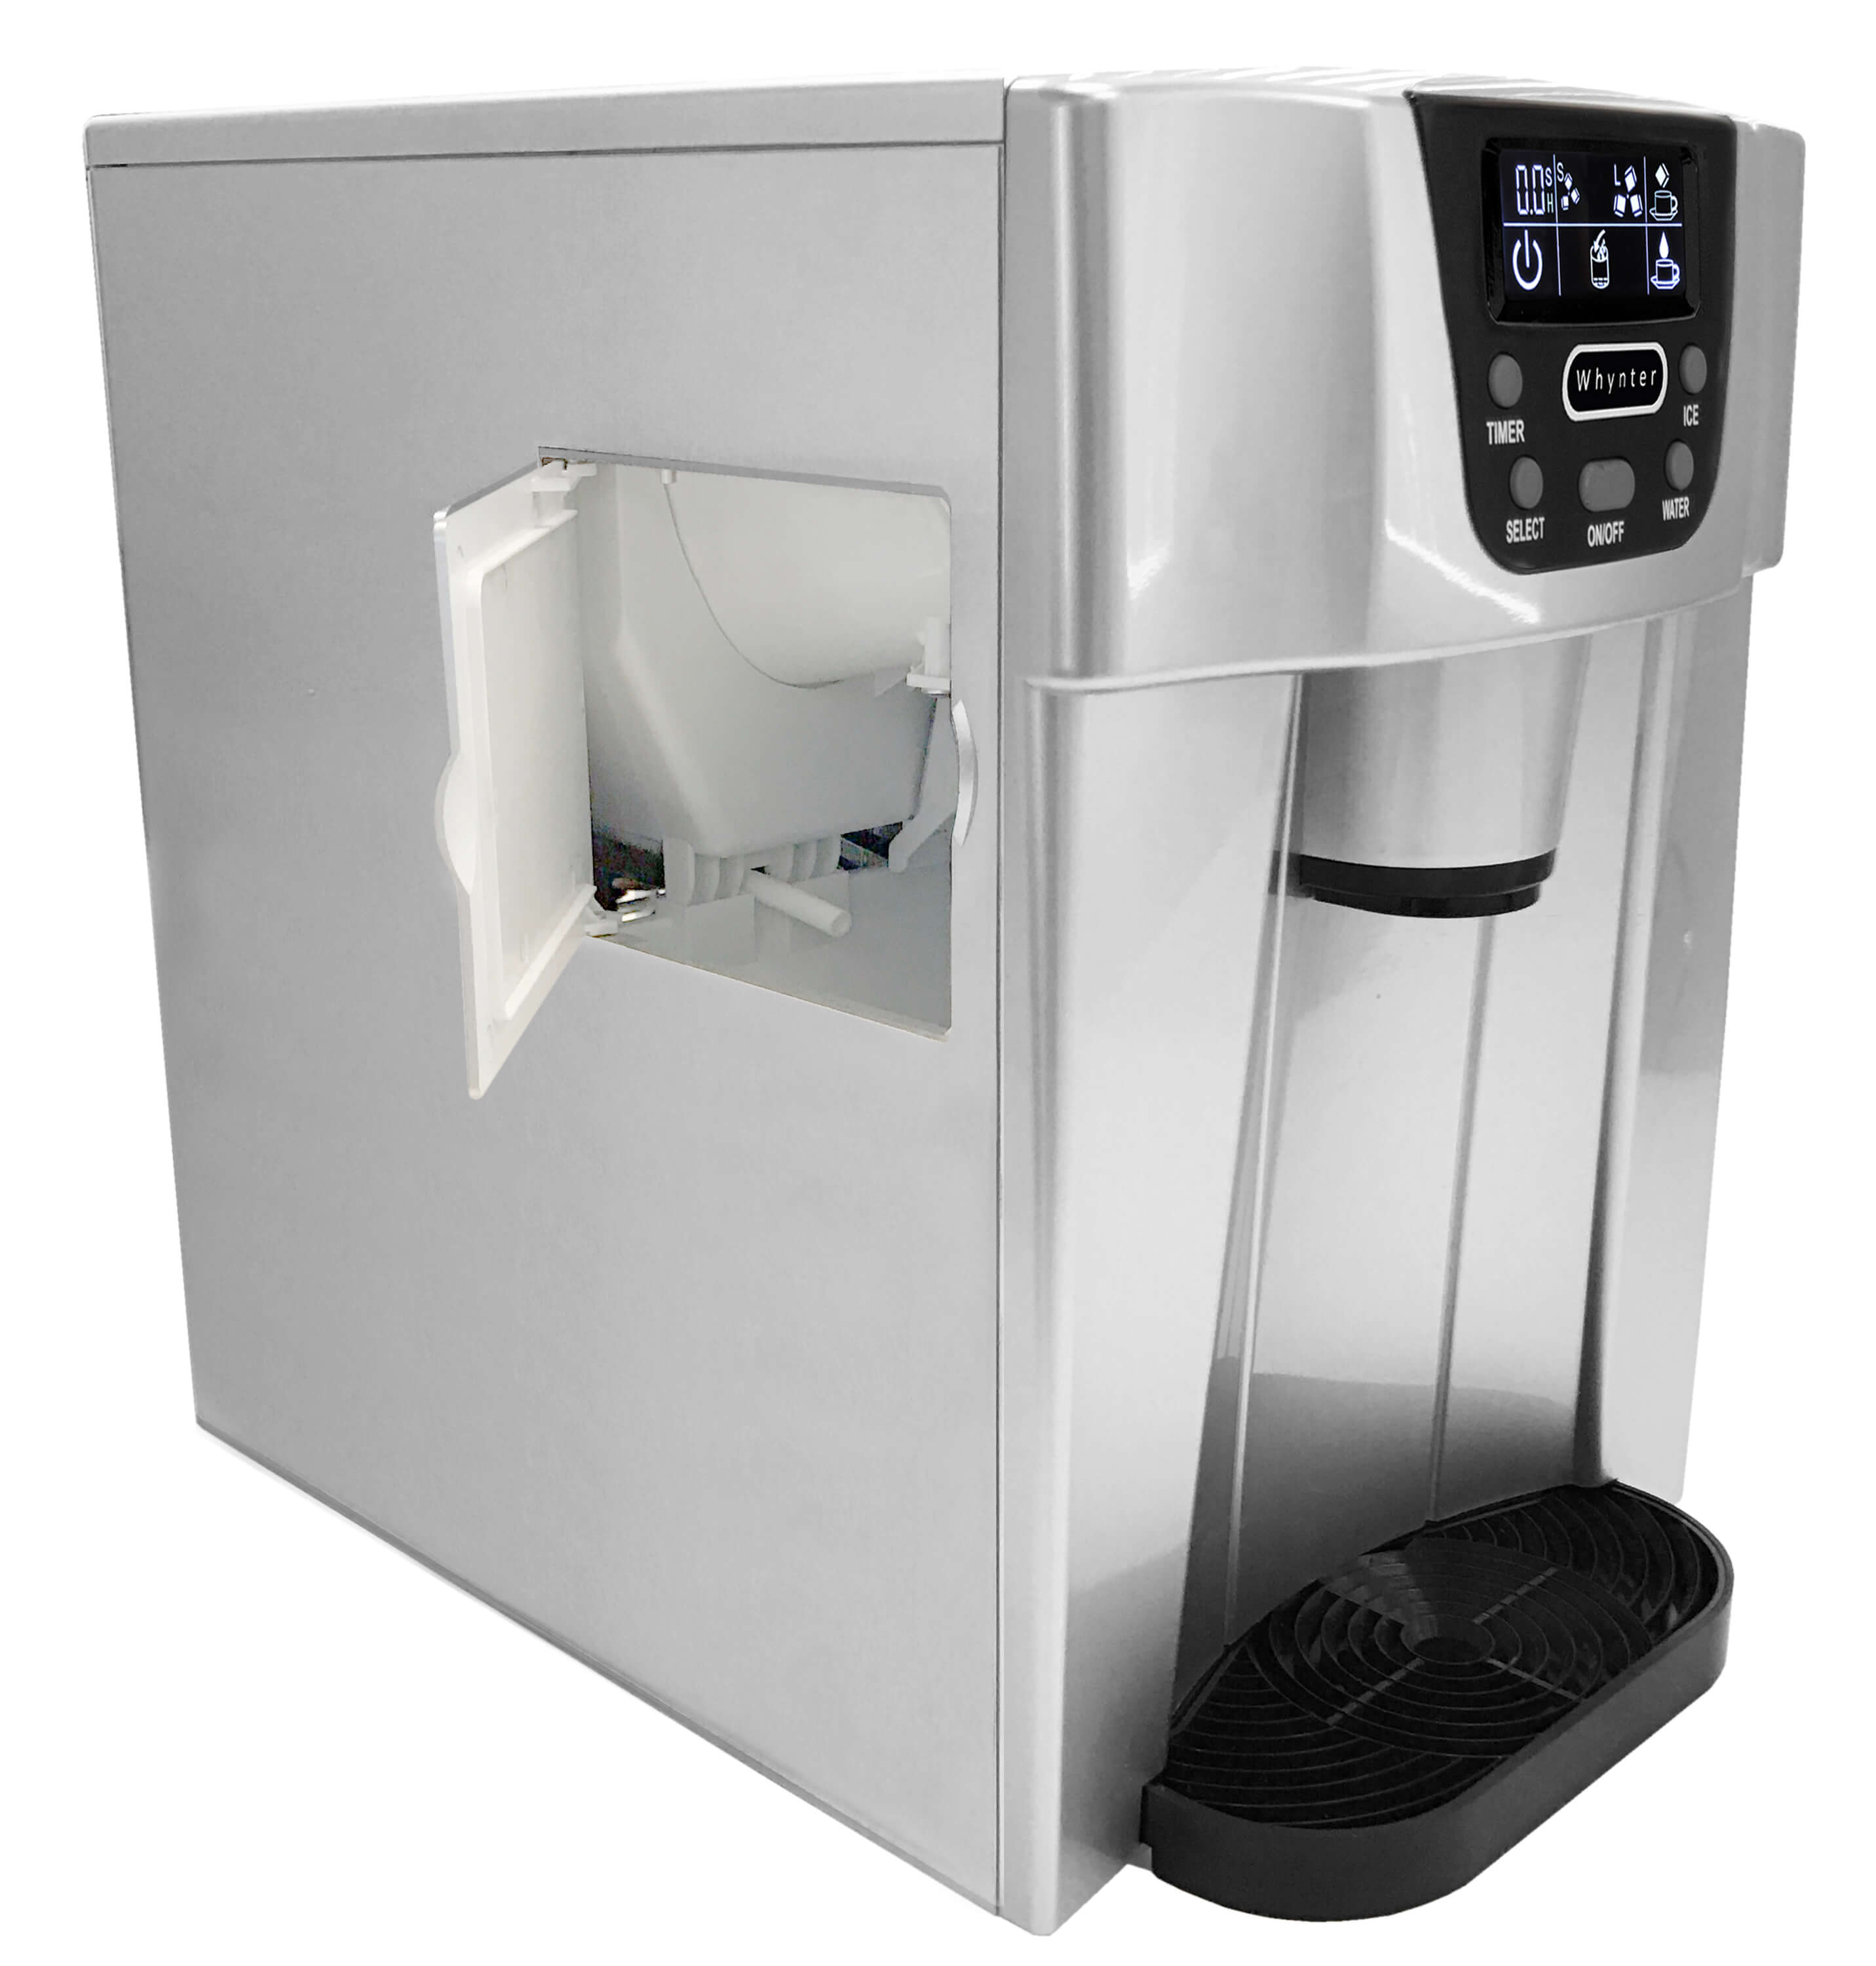 Whynter Portable Ice Maker with Water Connection (Stainless Steel, 49 Lb.)